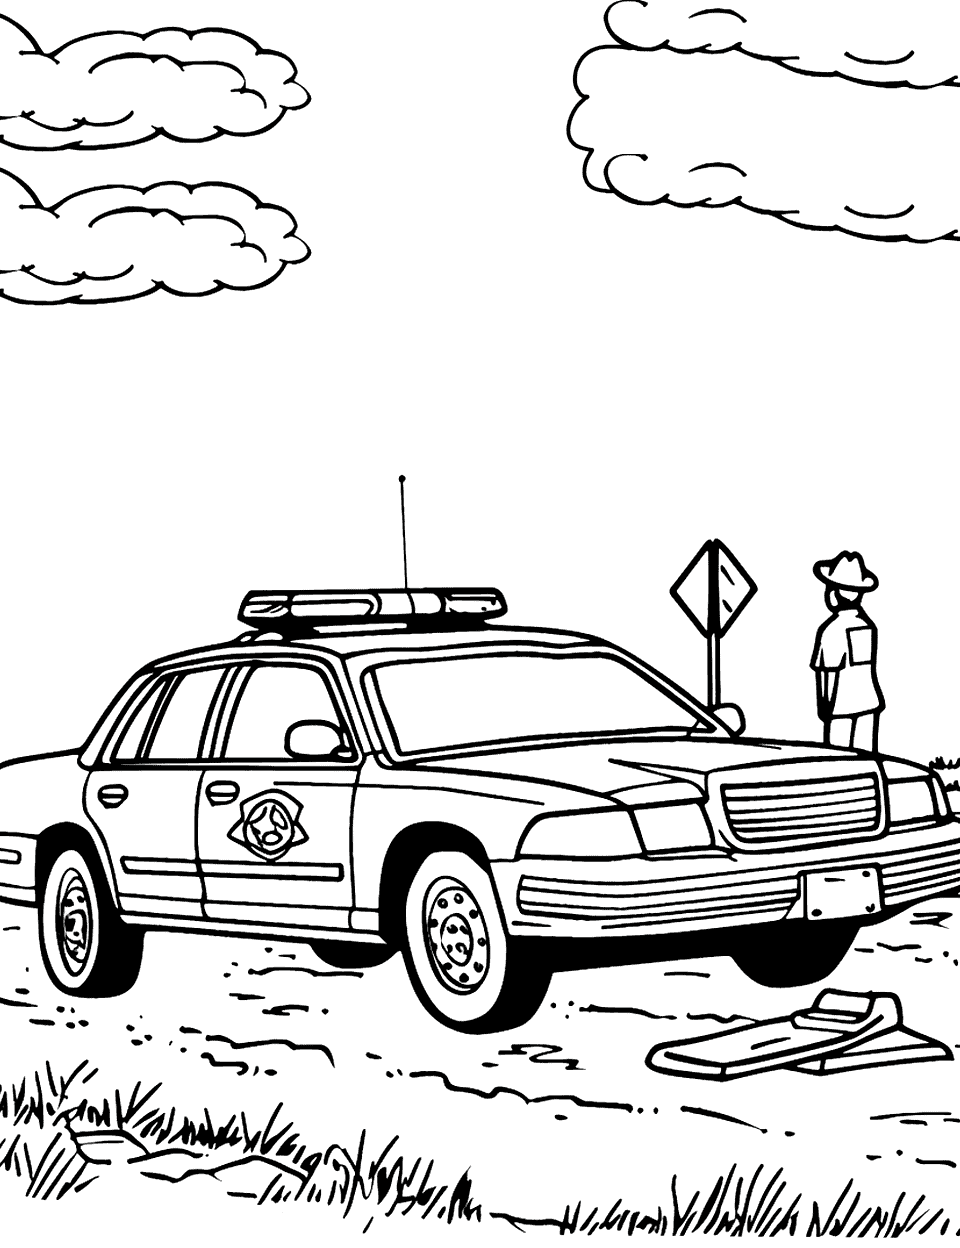 Crime Scene Investigation Police Car Coloring Page - A detective examining clues near a police car at a crime scene.